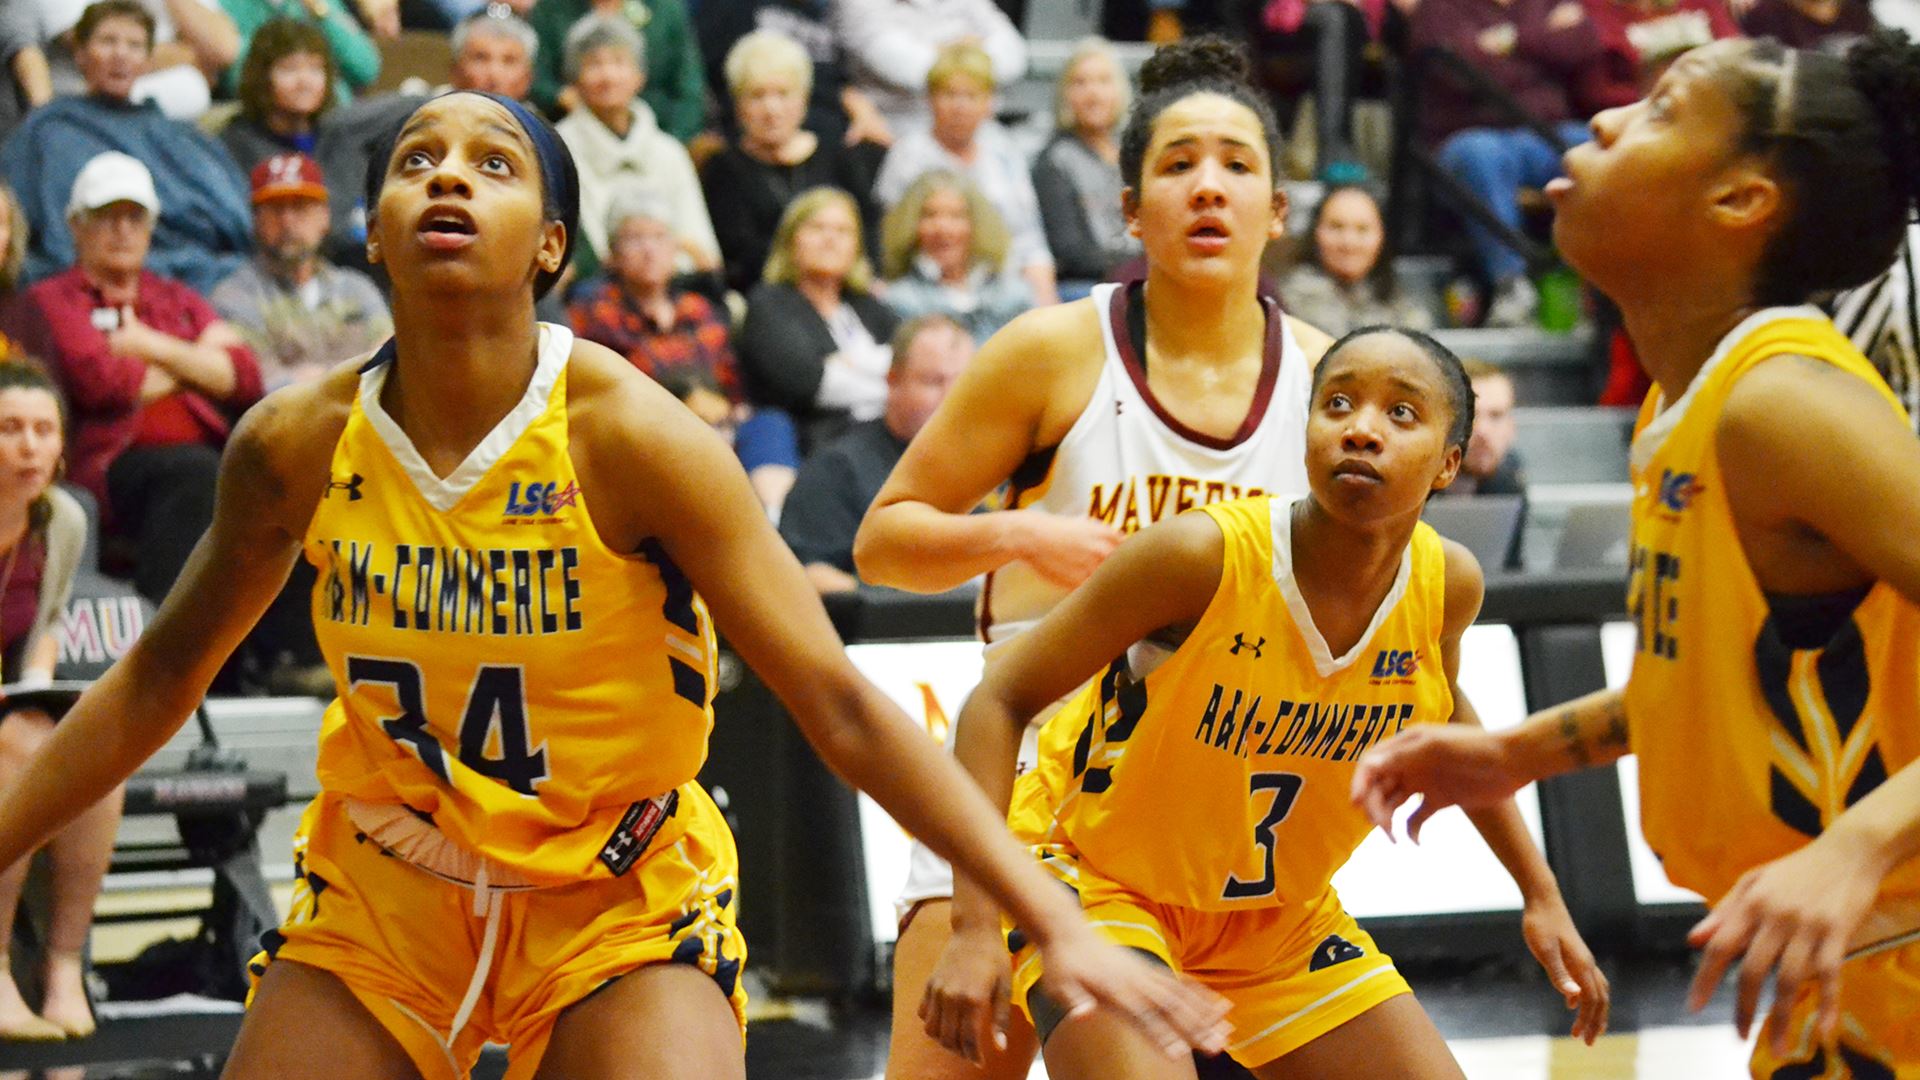 Seventh-seed Texas A&M-Commerce Women’s Basketball Team Fall to Second-seed Colorado Mesa in NCAA Regional Quarterfinal, 75-65